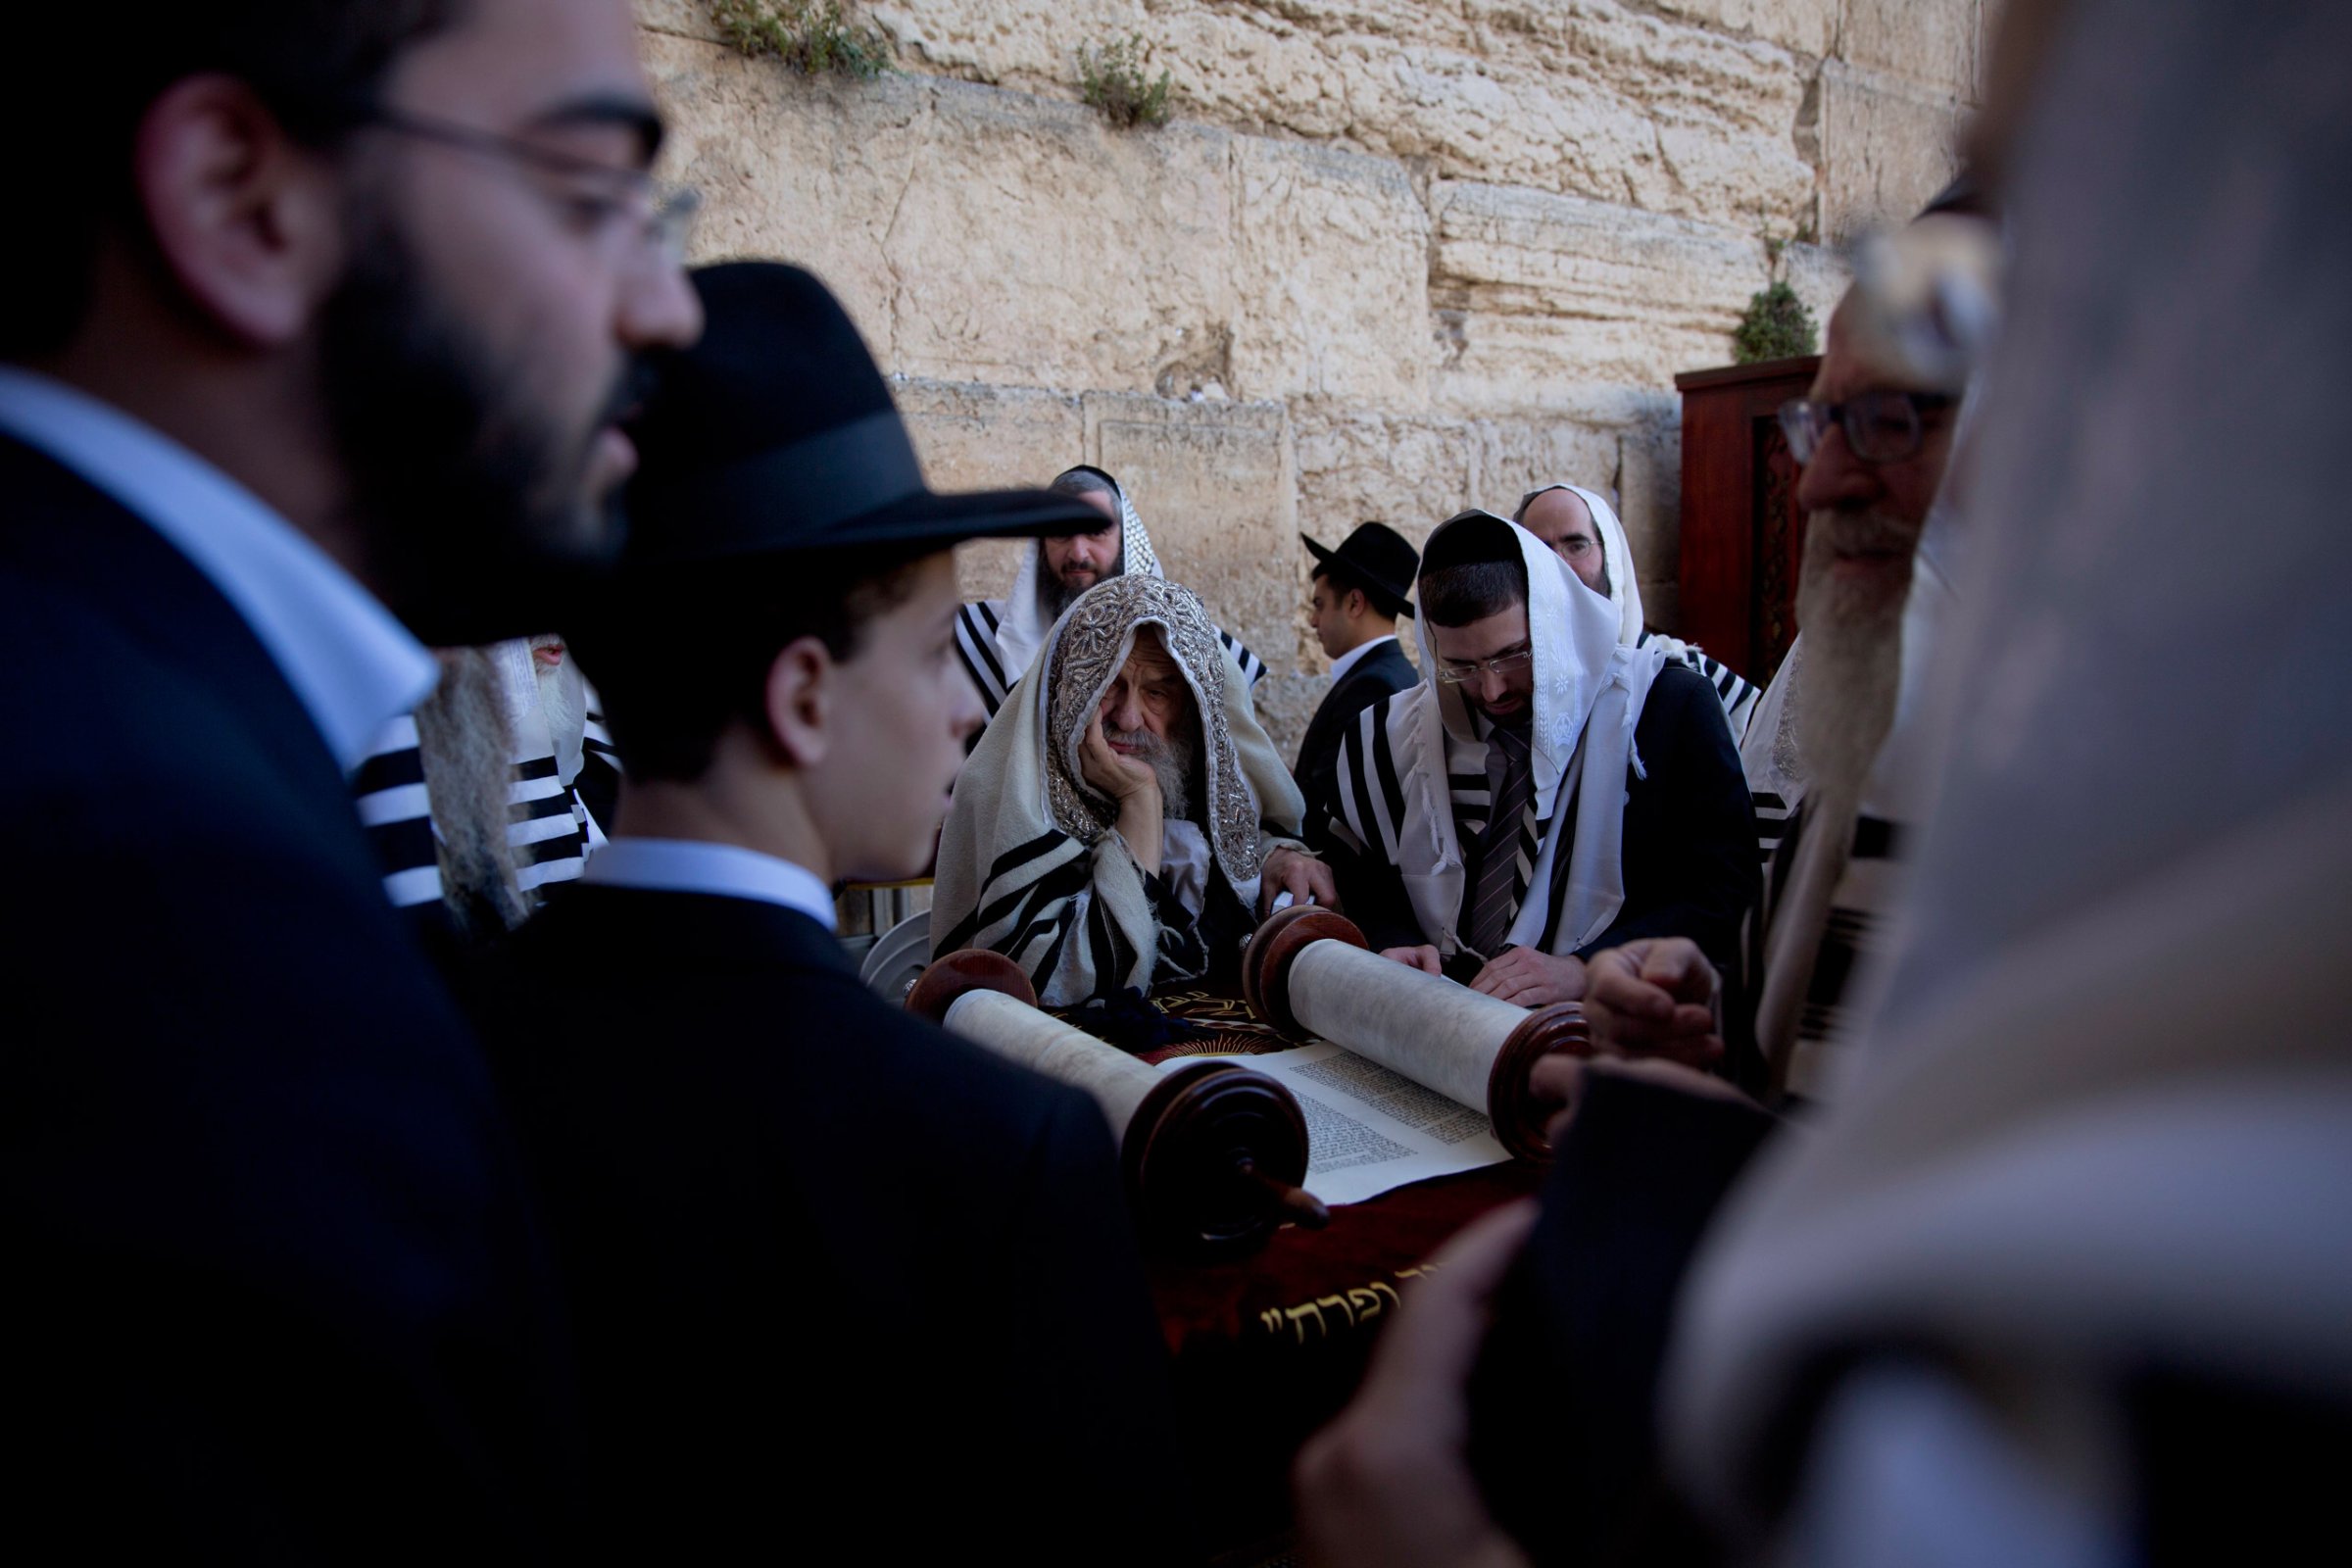 Covered in prayer shawls, ultra-Orthodox Jewish men read from a Thora scroll during the Jewish holiday of Passover in front of the Western Wall, the holiest site where Jews can pray, in Jerusalem's Old City, Sunday, April 24, 2016. (AP Photo/Ariel Schalit)